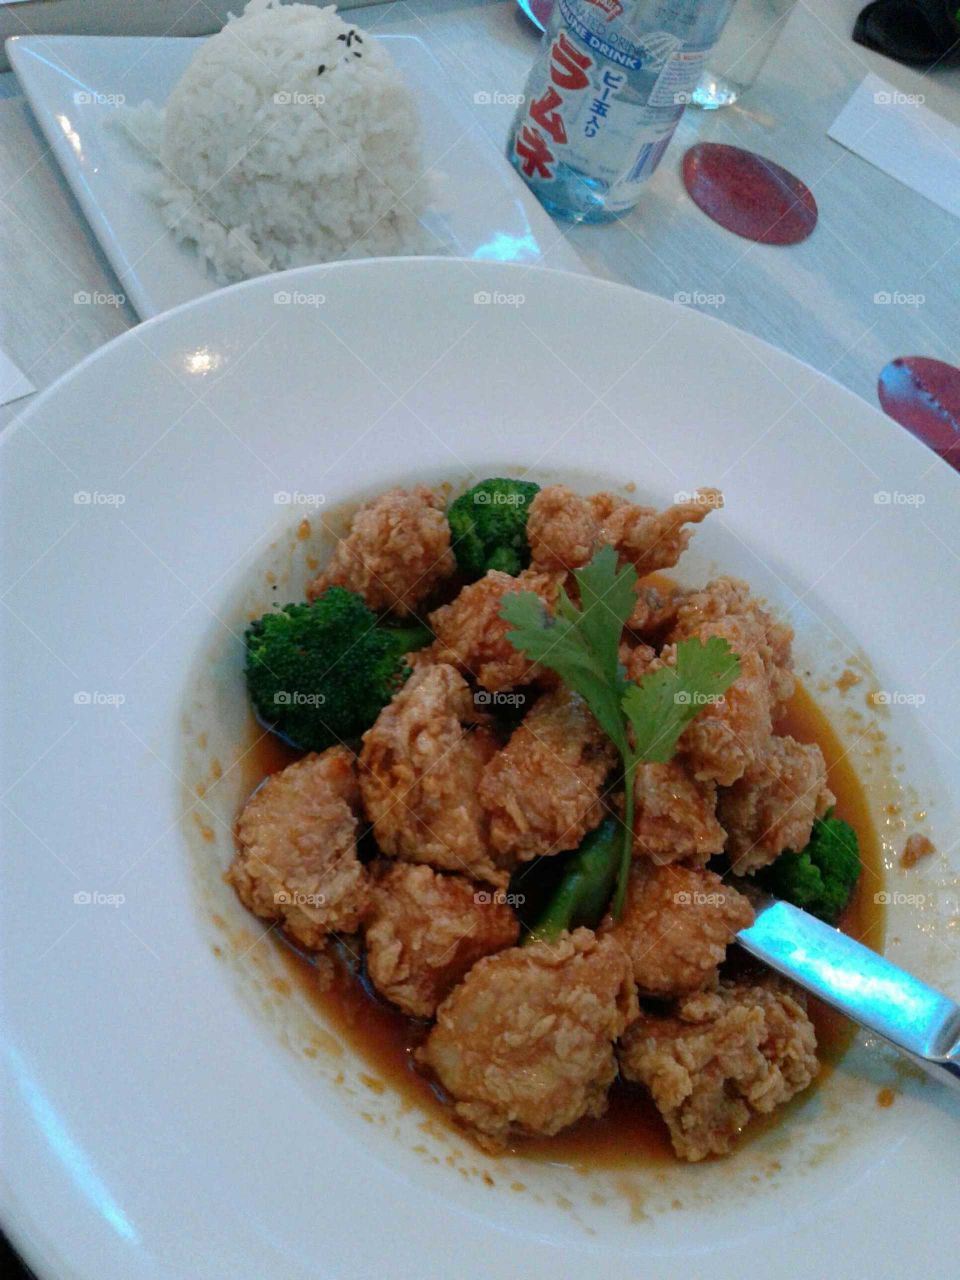 Orange chicken from the Asian Mint